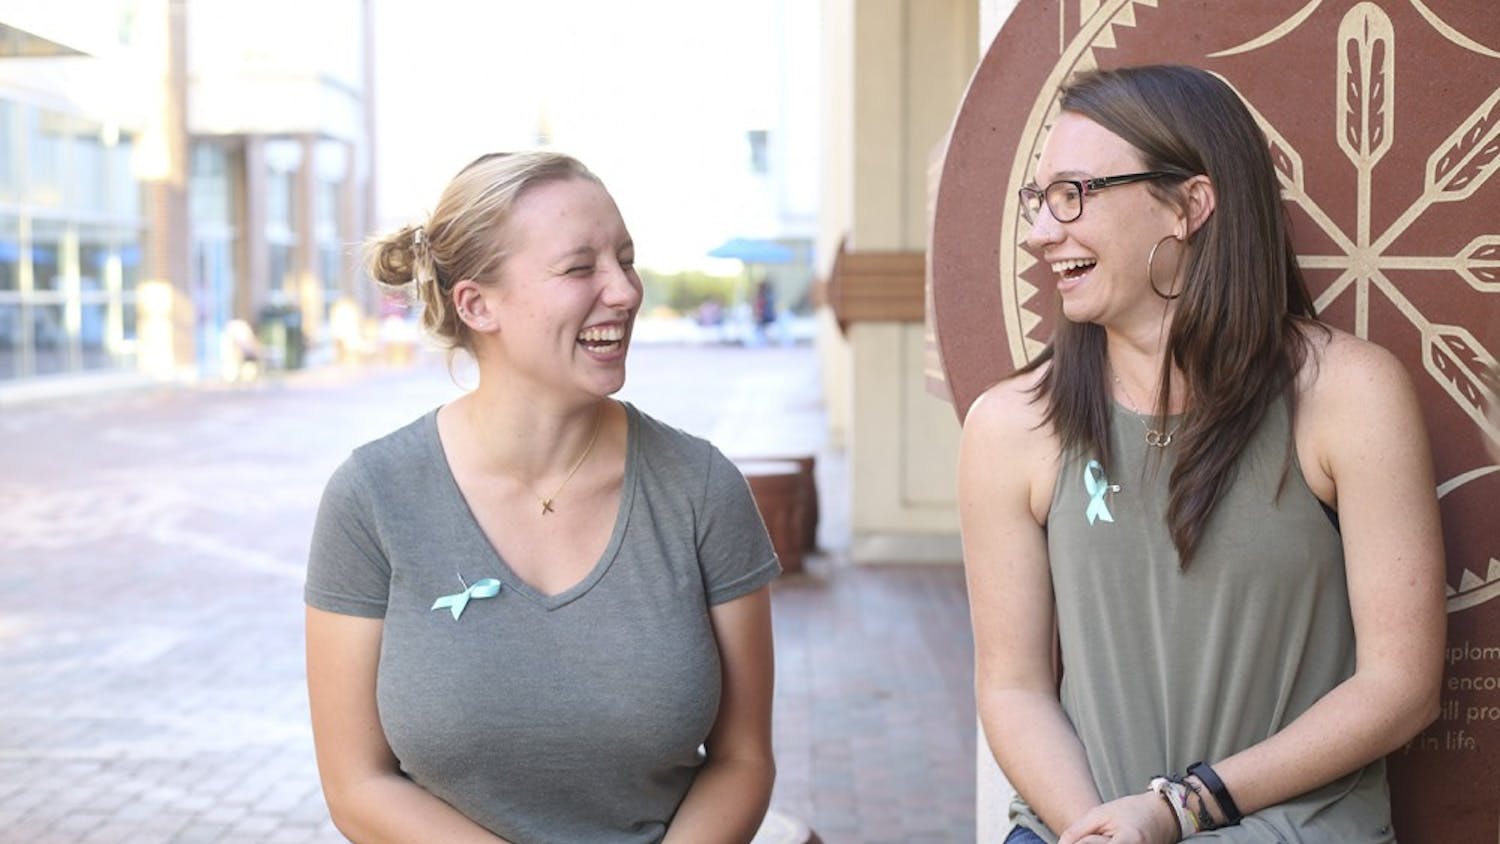 Emma Johnson(left) and Hannah Petersen(right) were interviewed on their project "Our Story" event where survivors of sexual assault talk about their experiences.